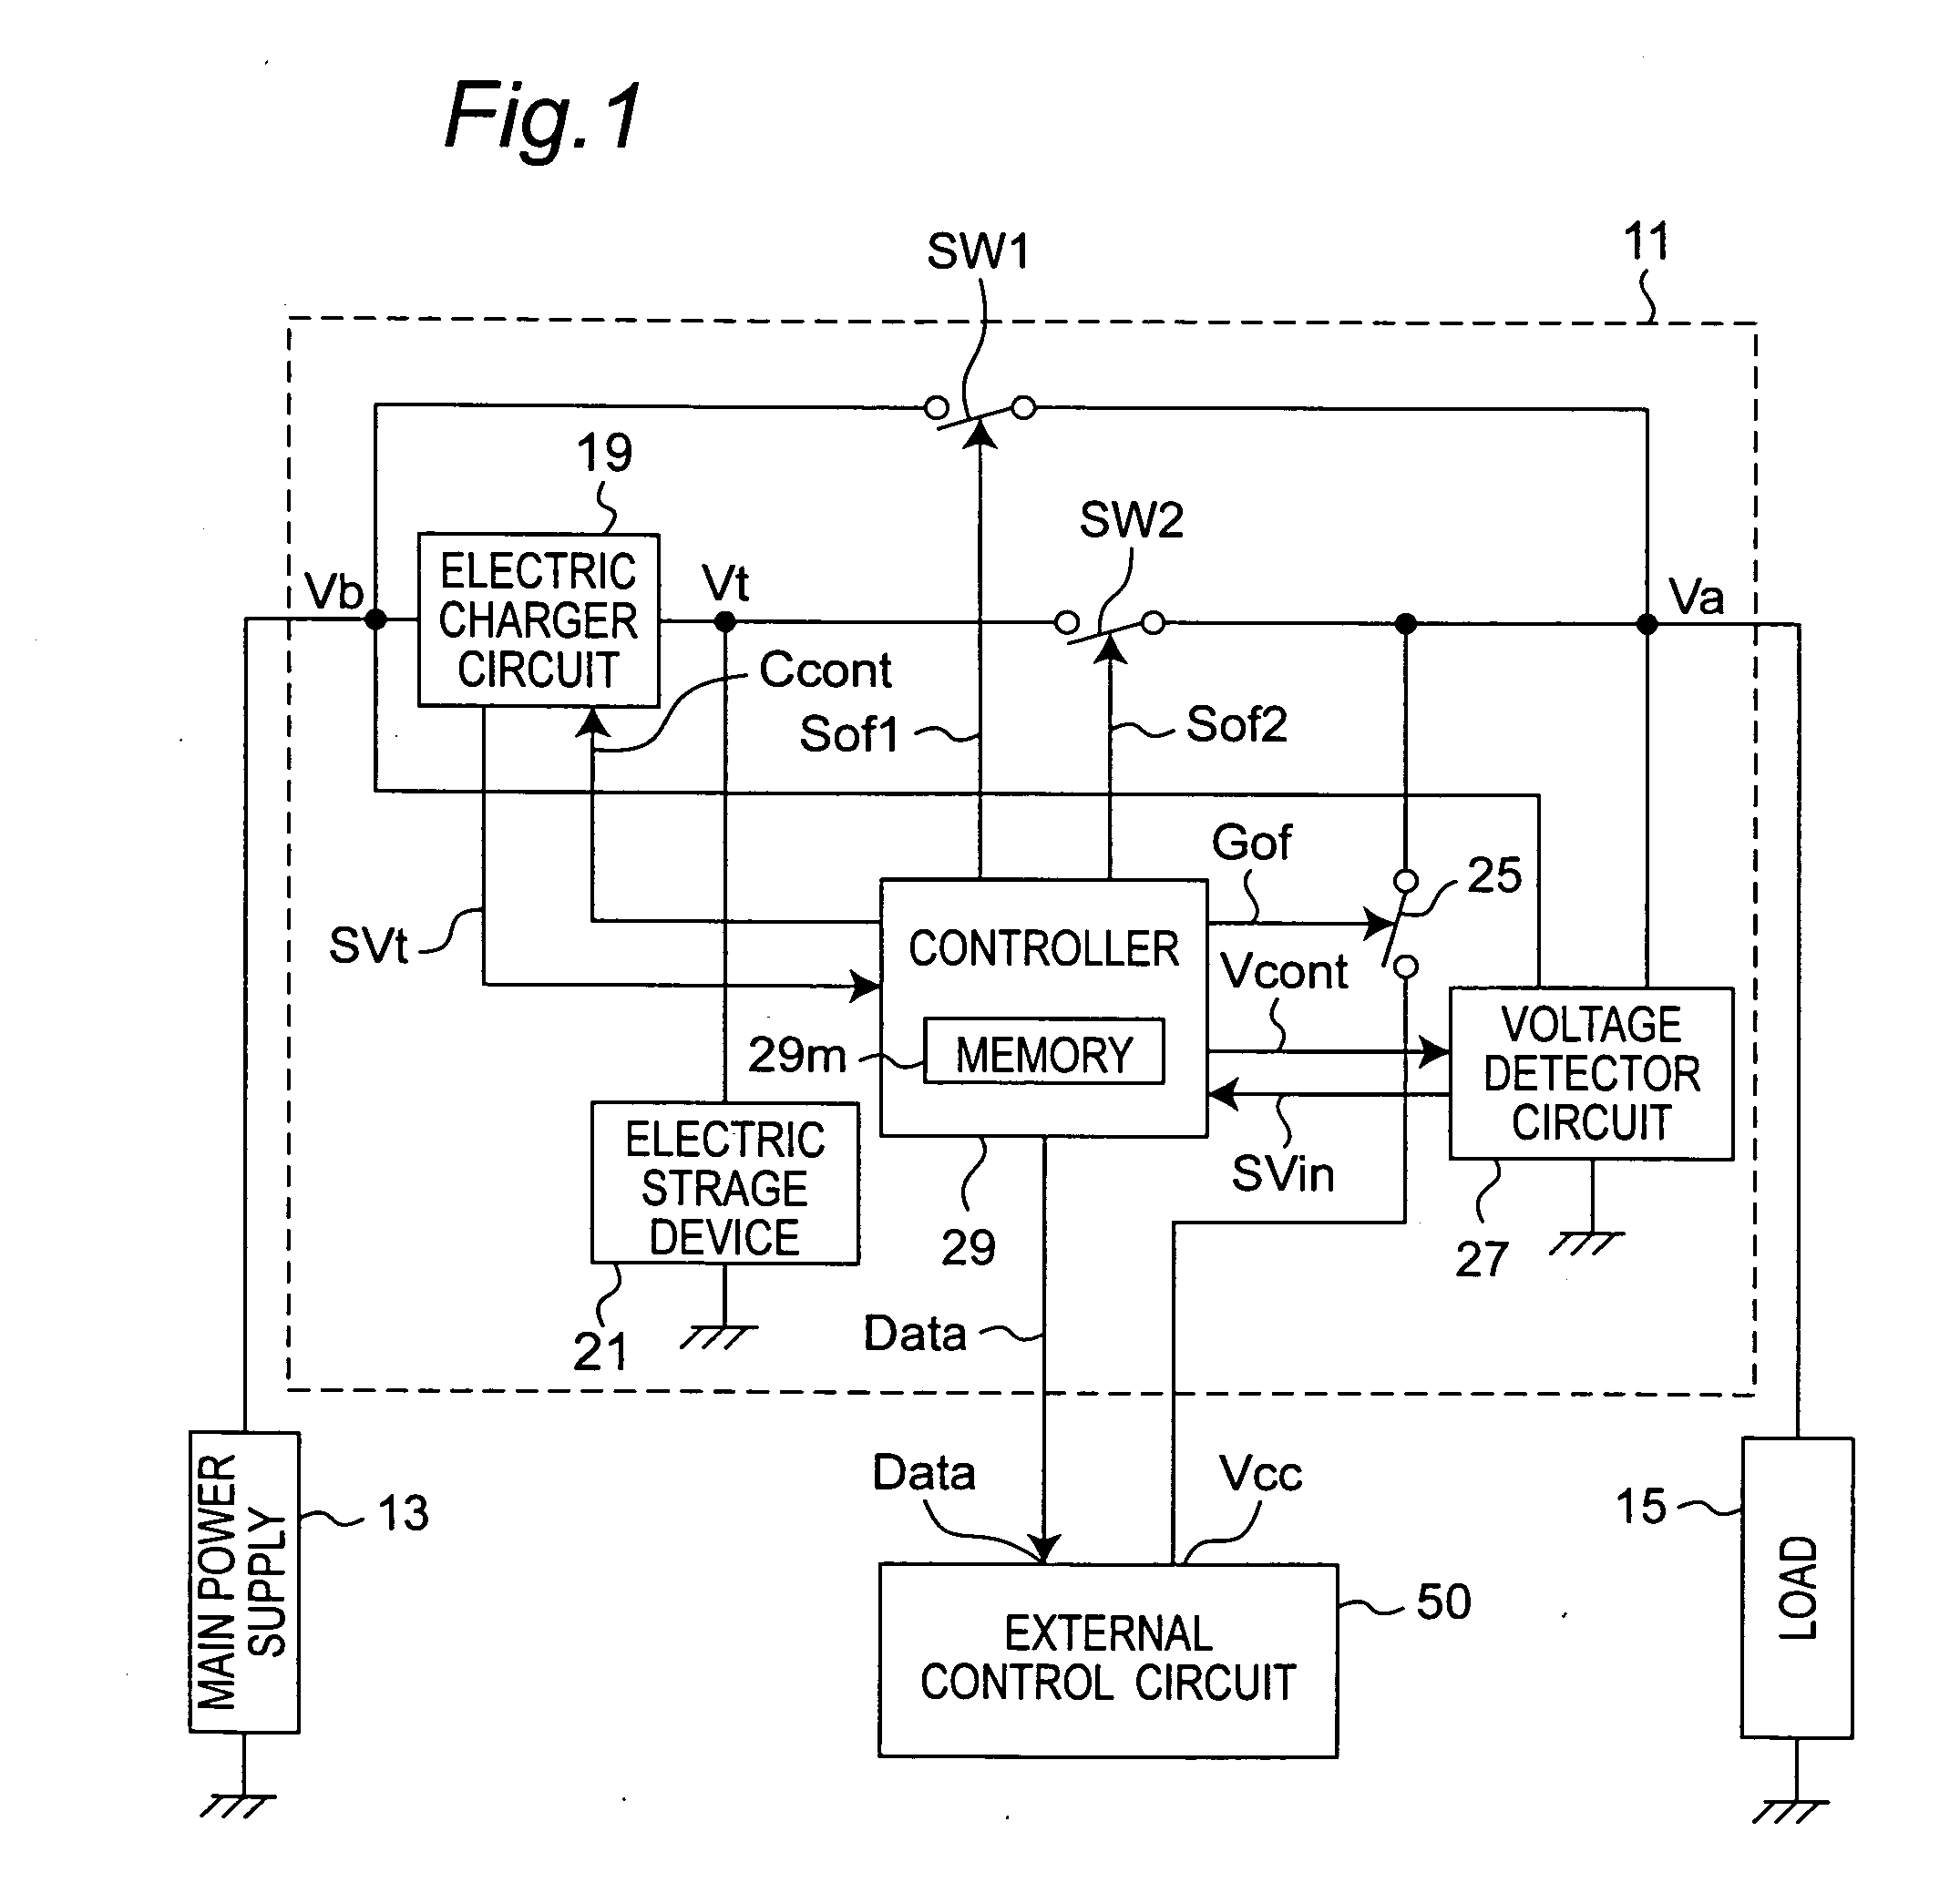 Electrical storage apparatus for use in auxiliary power supply supplying electric power from electric storage device upon voltage drop of main power supply